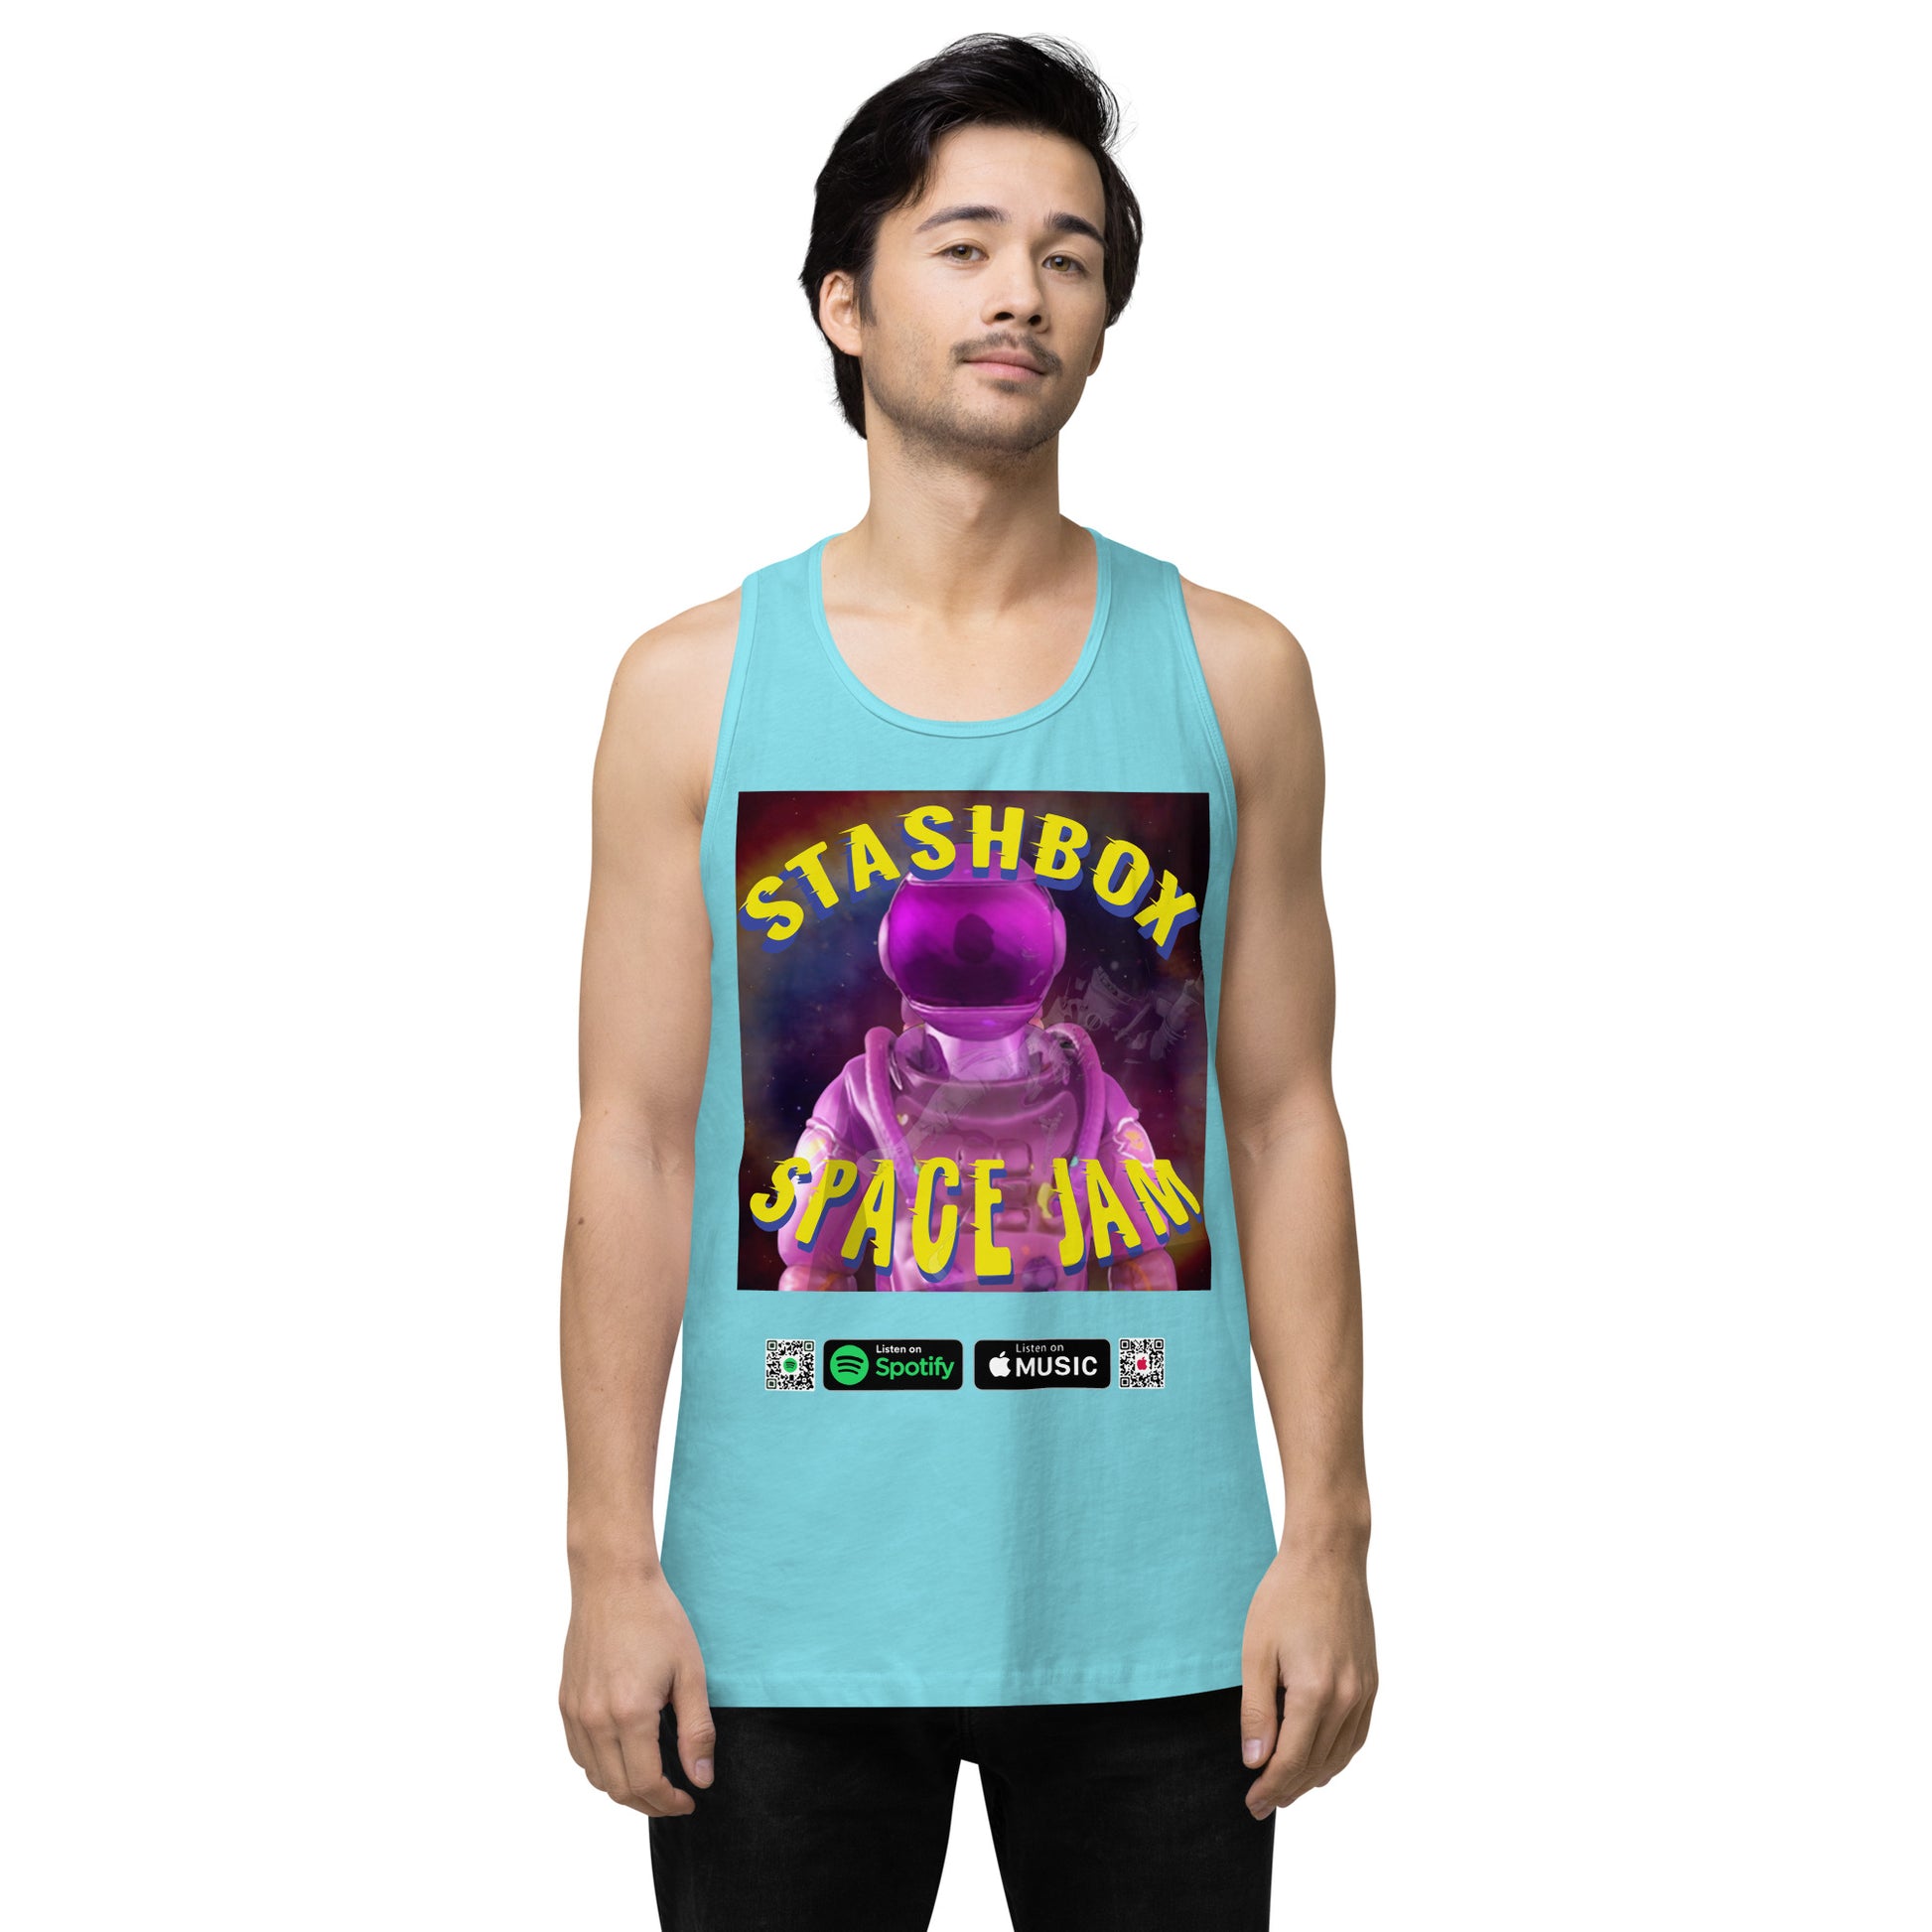 Beyond Gravity: Space Jam - Stashbox Men’s Premium Tank Top, Artwork #005. Elevate your wardrobe to intergalactic heights with this premium tank. A fusion of art and astronomy, perfect for those who find inspiration in the cosmos. #StashboxGalacticArt #SpaceFashion #AstronomyLovers